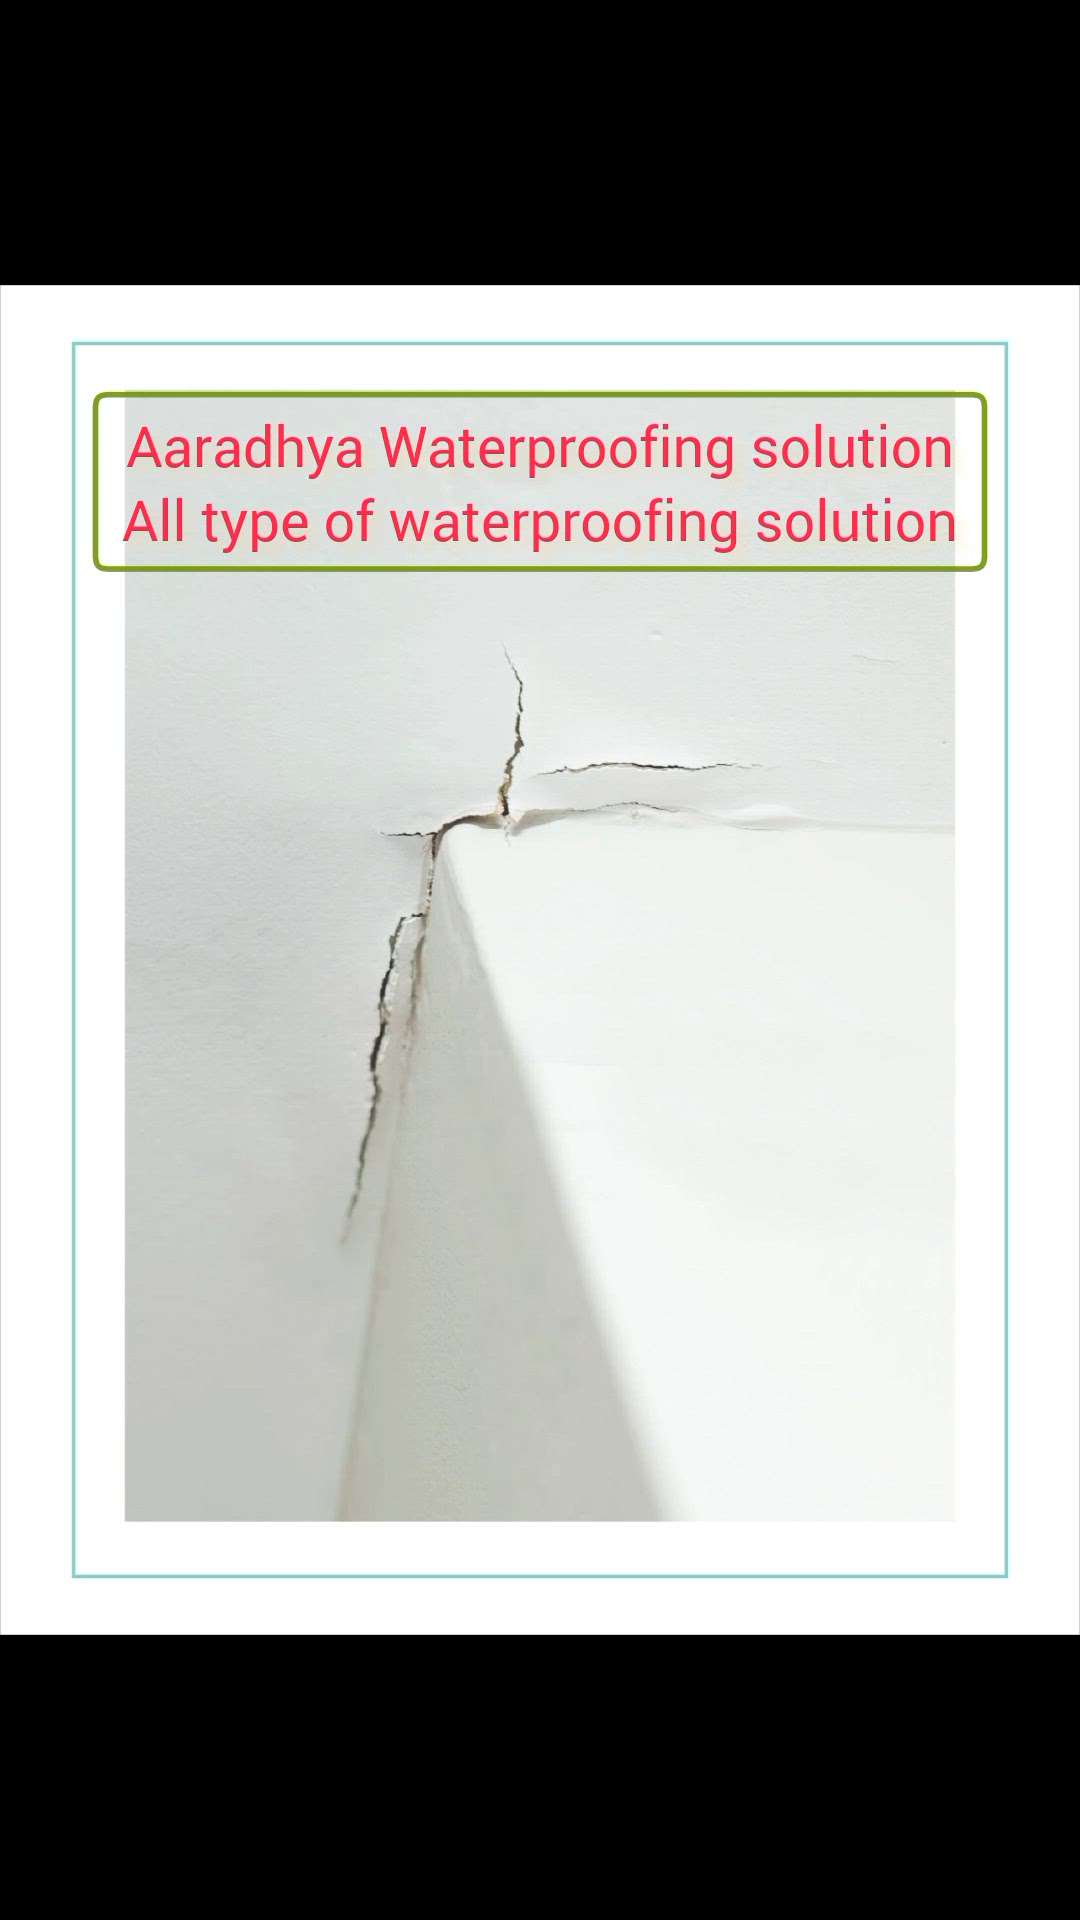 Aaradhya Waterproofing solution
All type of waterproofing solution
 WATER LEAKAGE
 PROBLEMS.
 TERRACE
SIDE  WALL ALL KIND OF
 WATERPROFING
 SOLUTIONS
FREE VISIT.5YRS WARRA call now 9907221771 9111888771